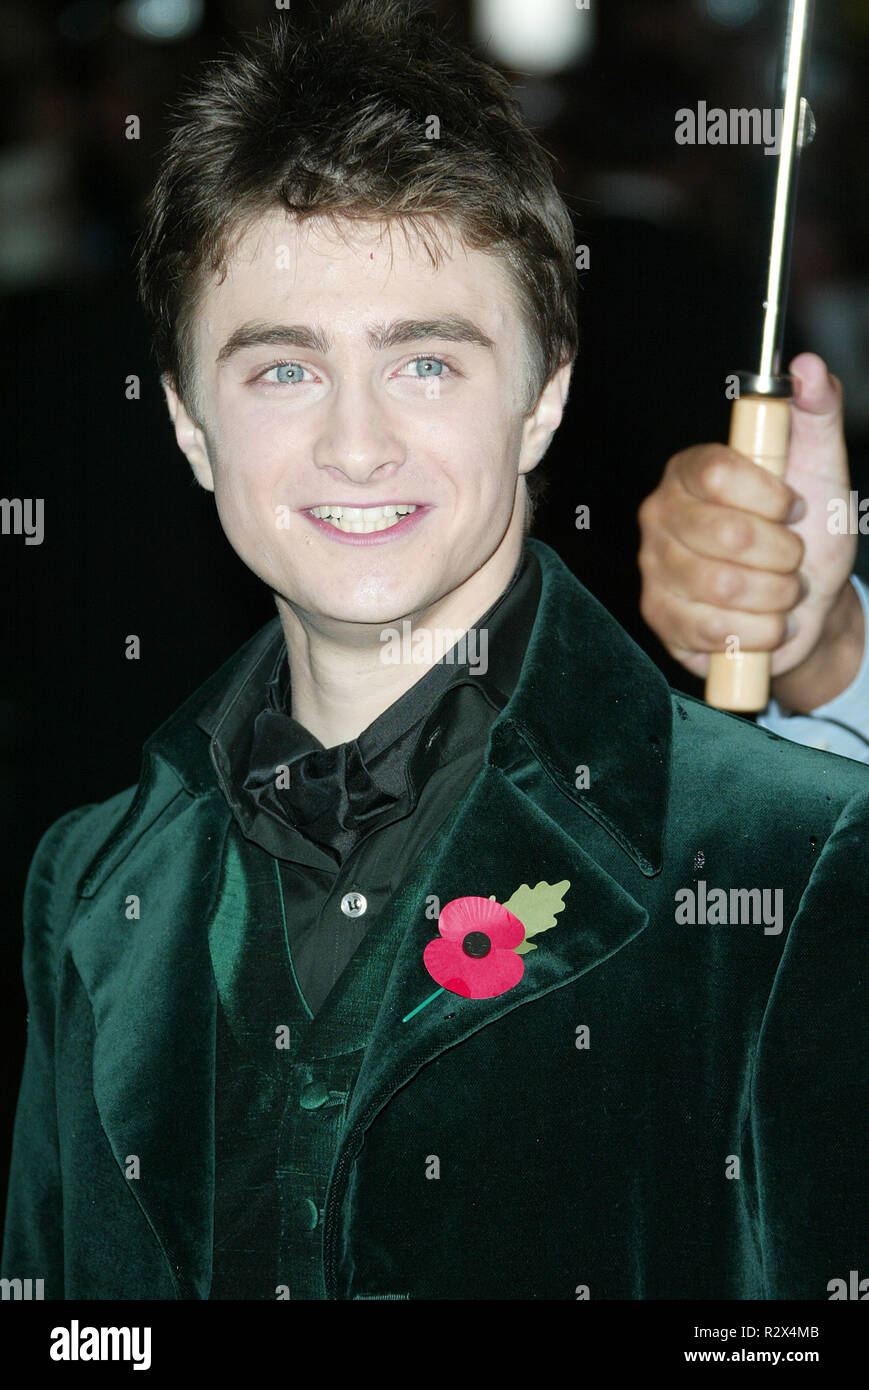 DANIEL RADCLIFFE HARRY POTTER & THE GOBLET OF FIRE FILM PREMIER ODEON LEICESTER SQUARE LONDON ENGLAND 06 November 2005 Stock Photo